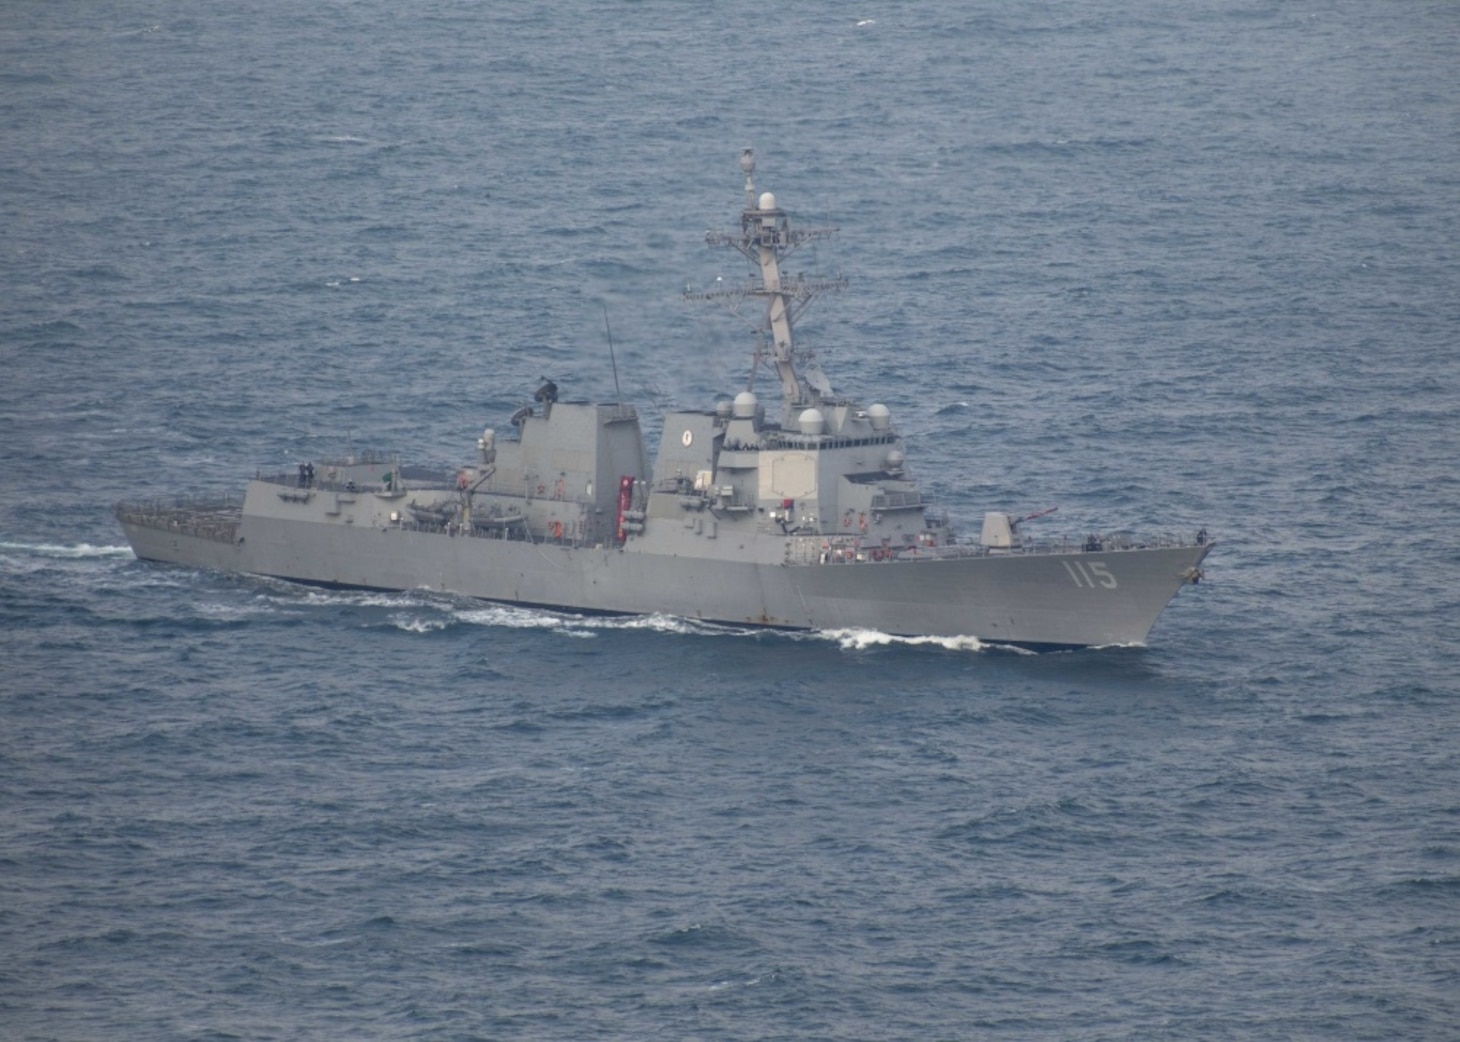 PACIFIC OCEAN (March 4, 2020) The Arleigh Burke-class guided-missile destroyer USS Rafael Peralta (DDG 115) transits the Pacific Ocean March 4, 2020. Rafael Peralta, part of the Theodore Roosevelt Carrier Strike Group, is on a scheduled deployment to the Indo-Pacific. (U.S. Navy photo by Mass Communication Specialist 2nd Class Jason Isaacs)